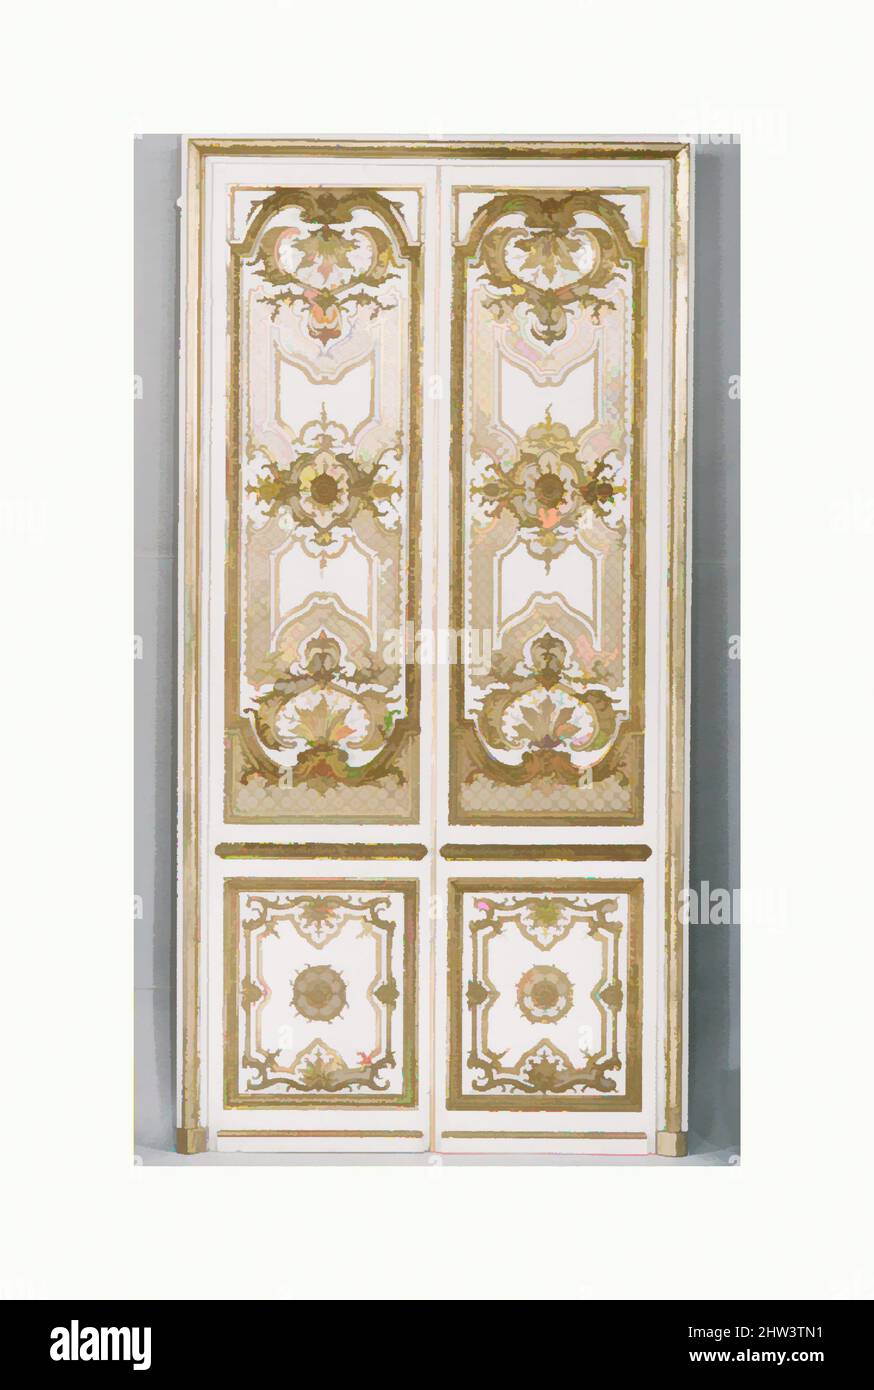 Art inspired by Double door: four panels, two pilasters, three gilt moldings for the door frame, ca. 1715, French, Carved, painted and gilded oak, a,b - doors with their trim i,j,k: 106-1/4 x 53-1/2 in. (269.9 x 135.9 cm), Woodwork, Classic works modernized by Artotop with a splash of modernity. Shapes, color and value, eye-catching visual impact on art. Emotions through freedom of artworks in a contemporary way. A timeless message pursuing a wildly creative new direction. Artists turning to the digital medium and creating the Artotop NFT Stock Photo